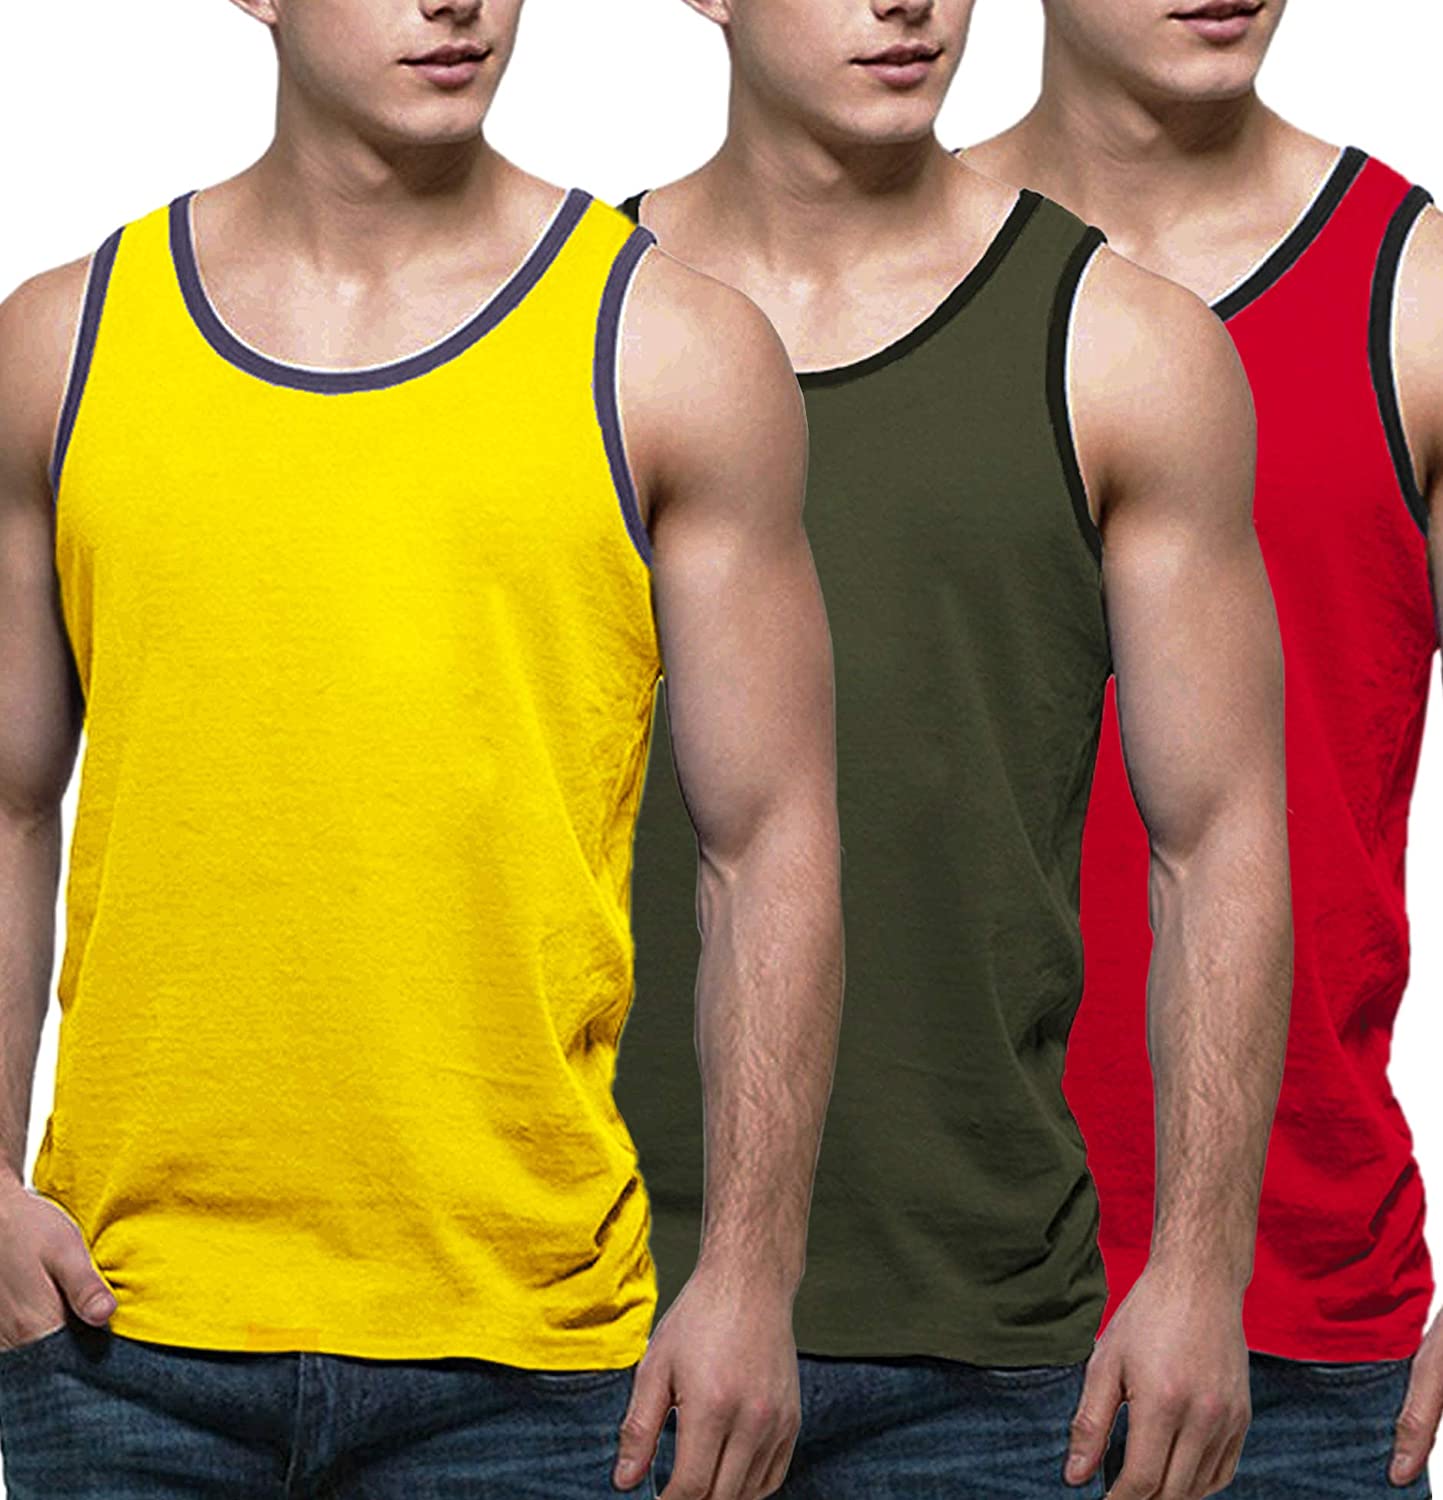 COOFANDY Men's 3 Pack Workout Tank Tops Sleeveless Gym Shirts Bodybuilding  Fitness Muscle Tee Shirts